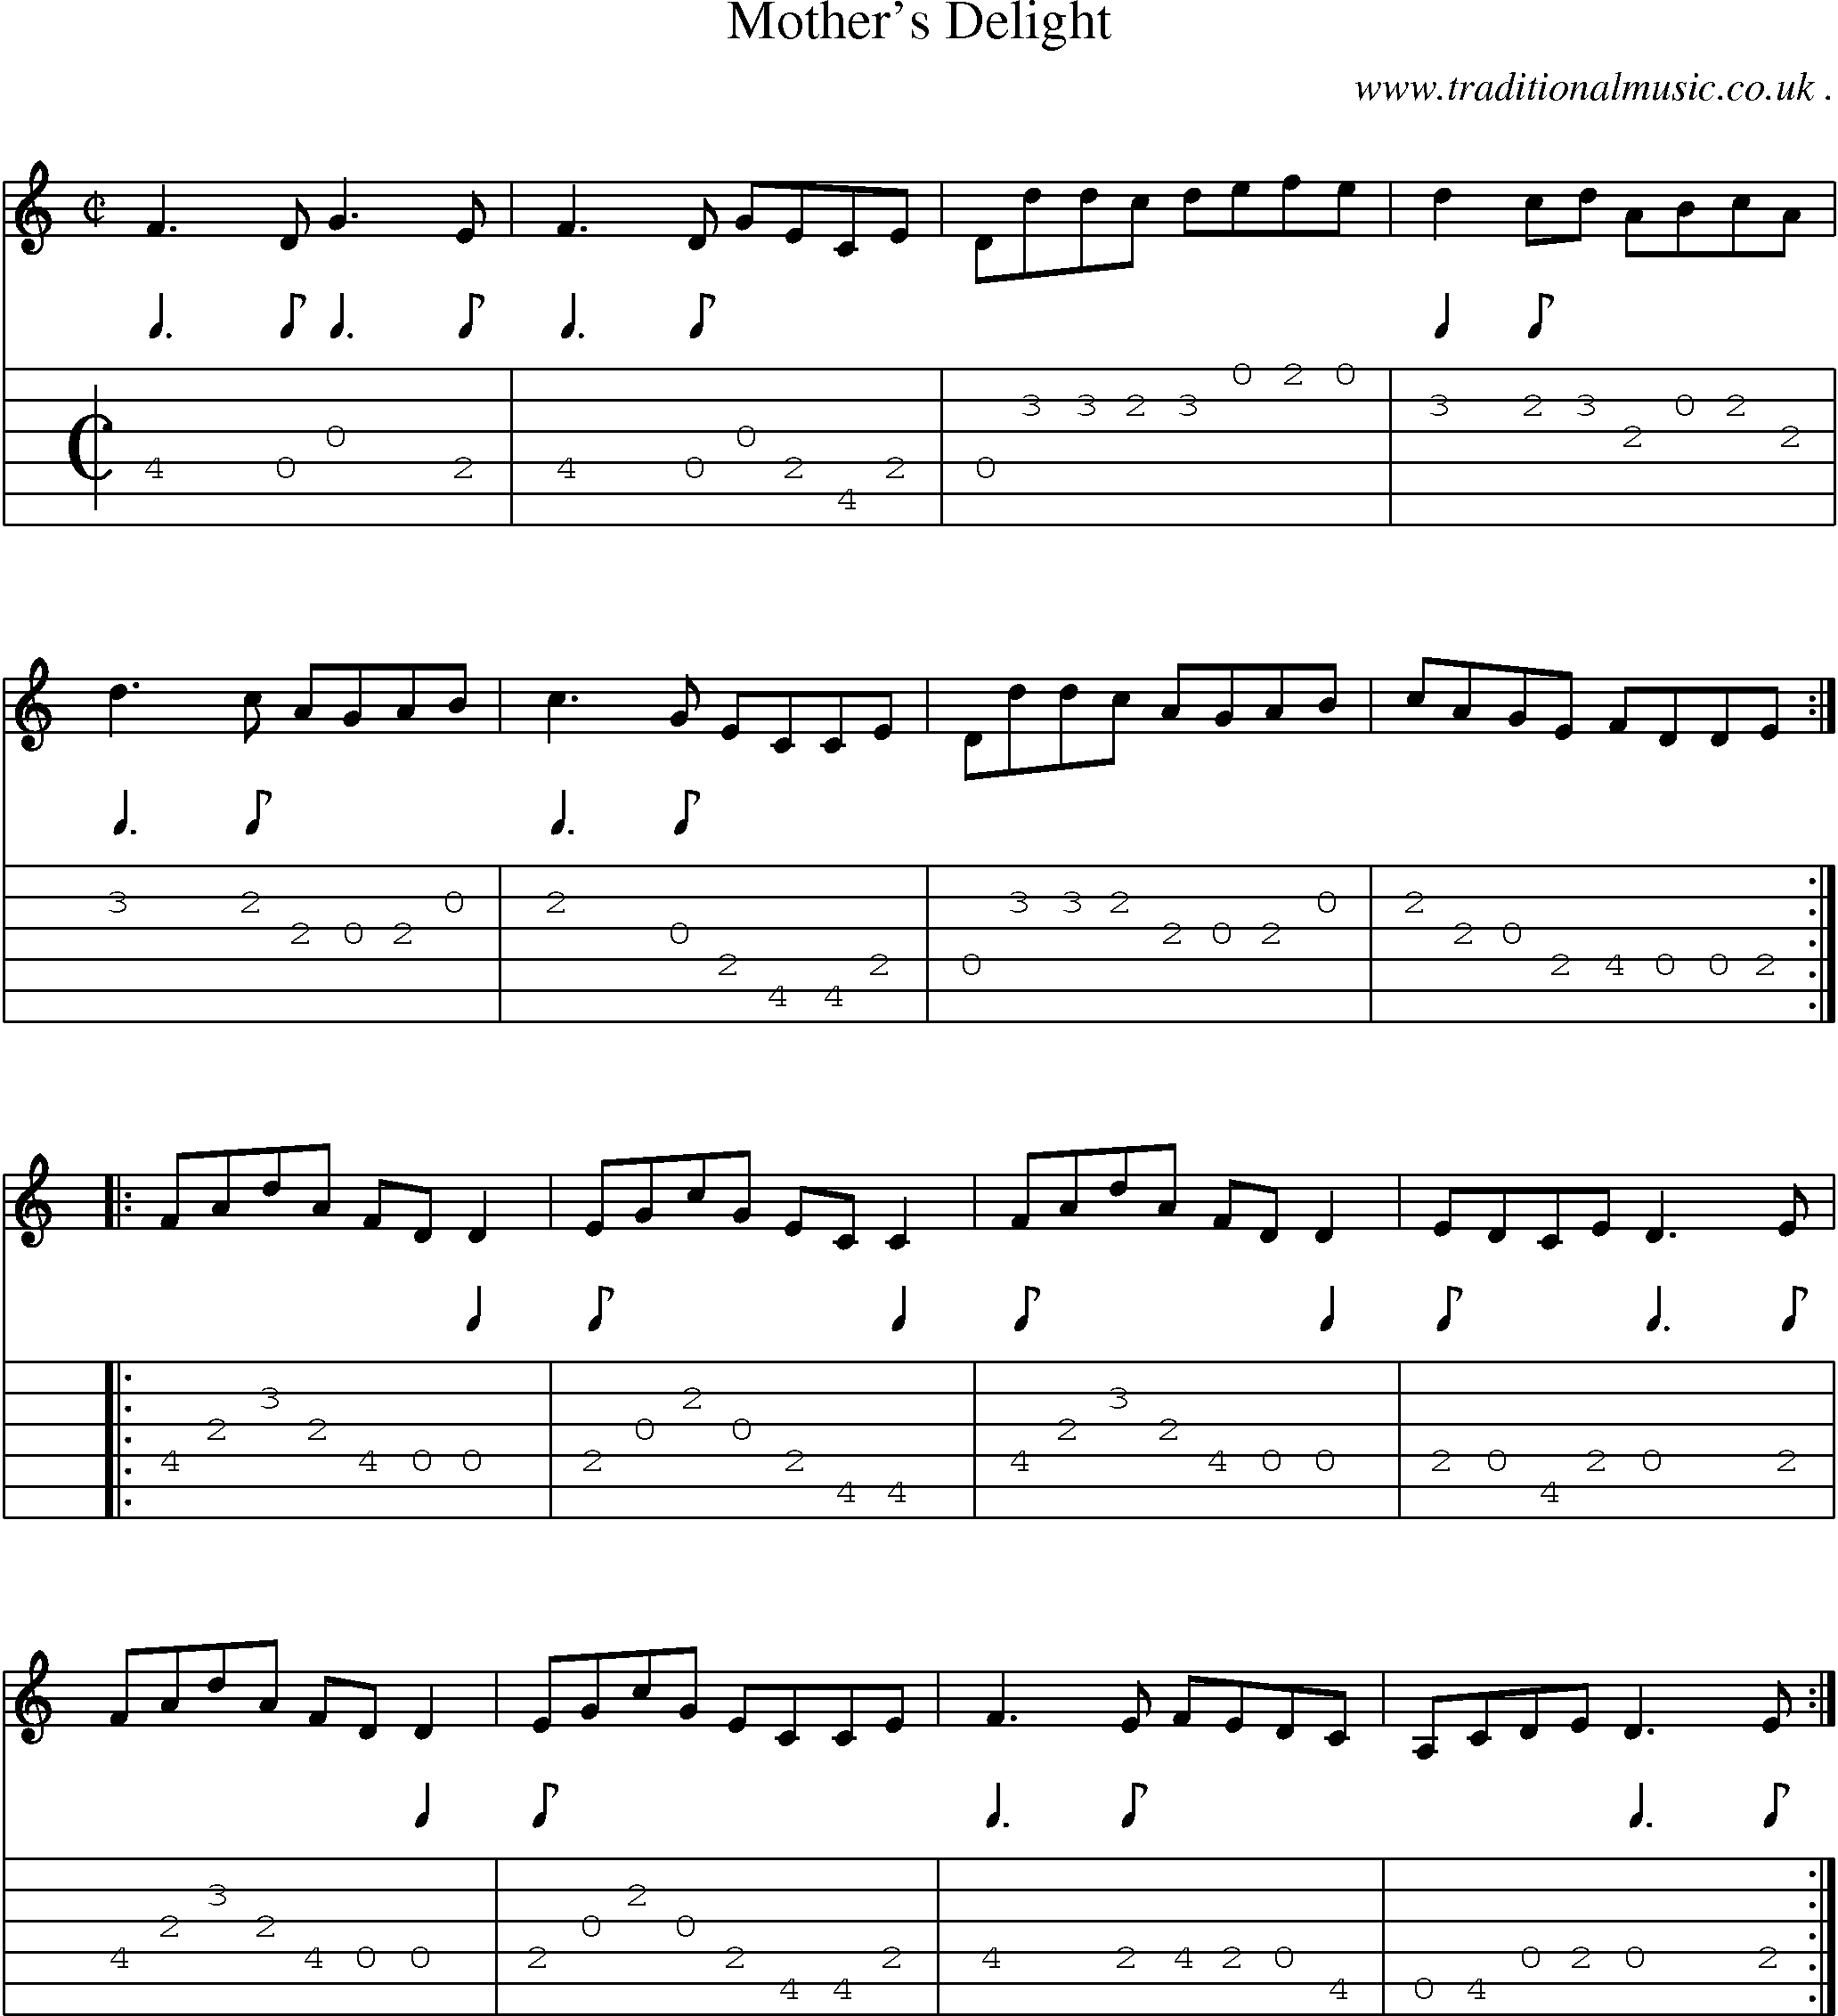 Sheet-Music and Guitar Tabs for Mothers Delight